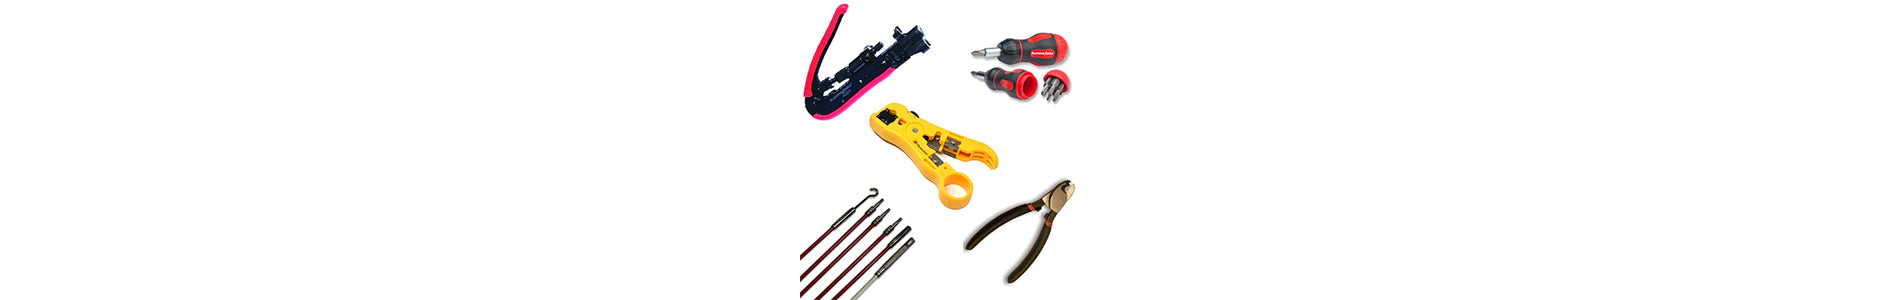 Miscellaneous  Tools and Wire Management